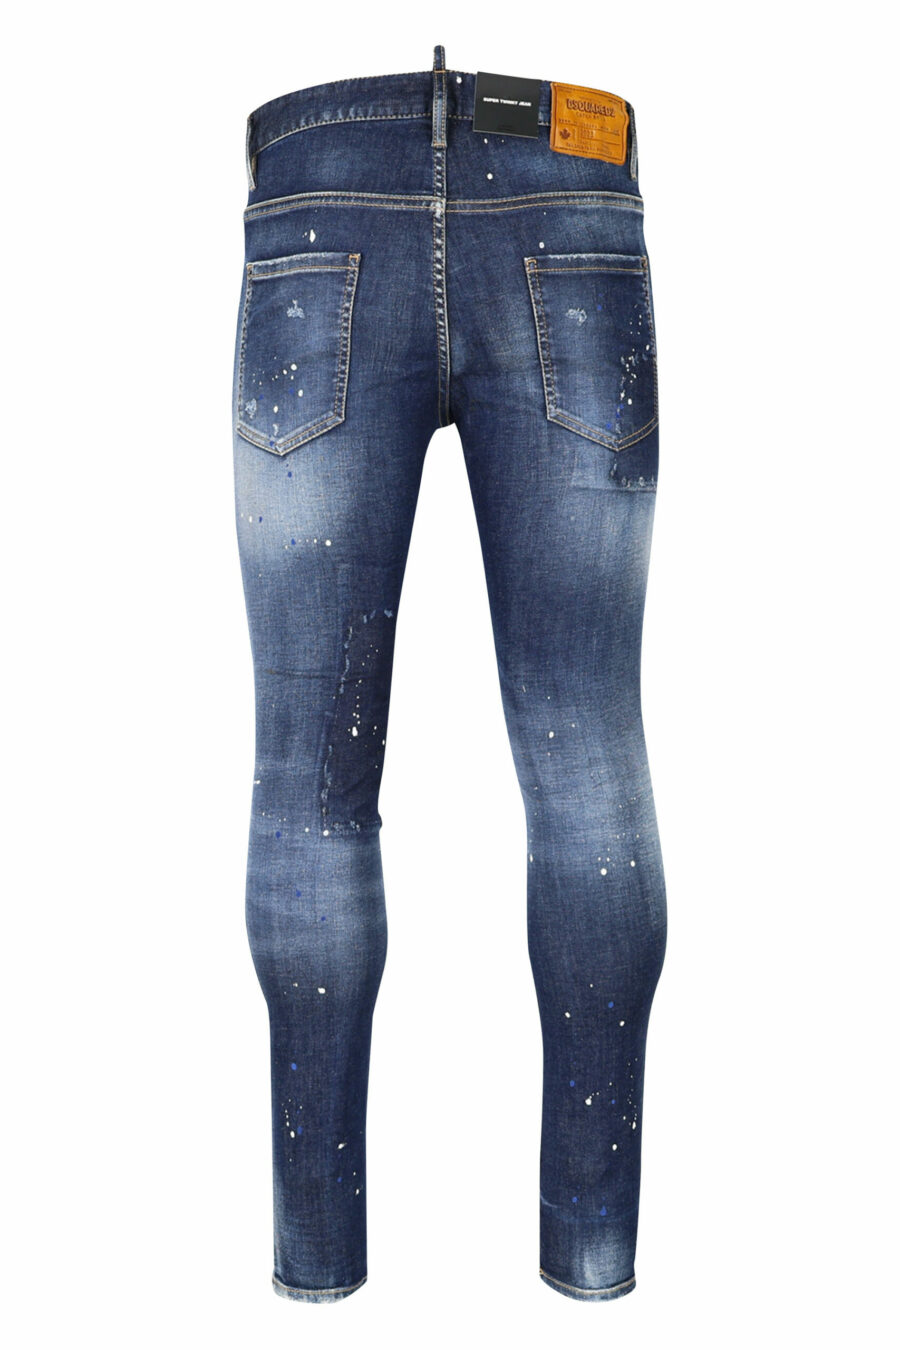 Blue "super twinky jean" jeans with patch and frayed - 8054148104863 2 scaled